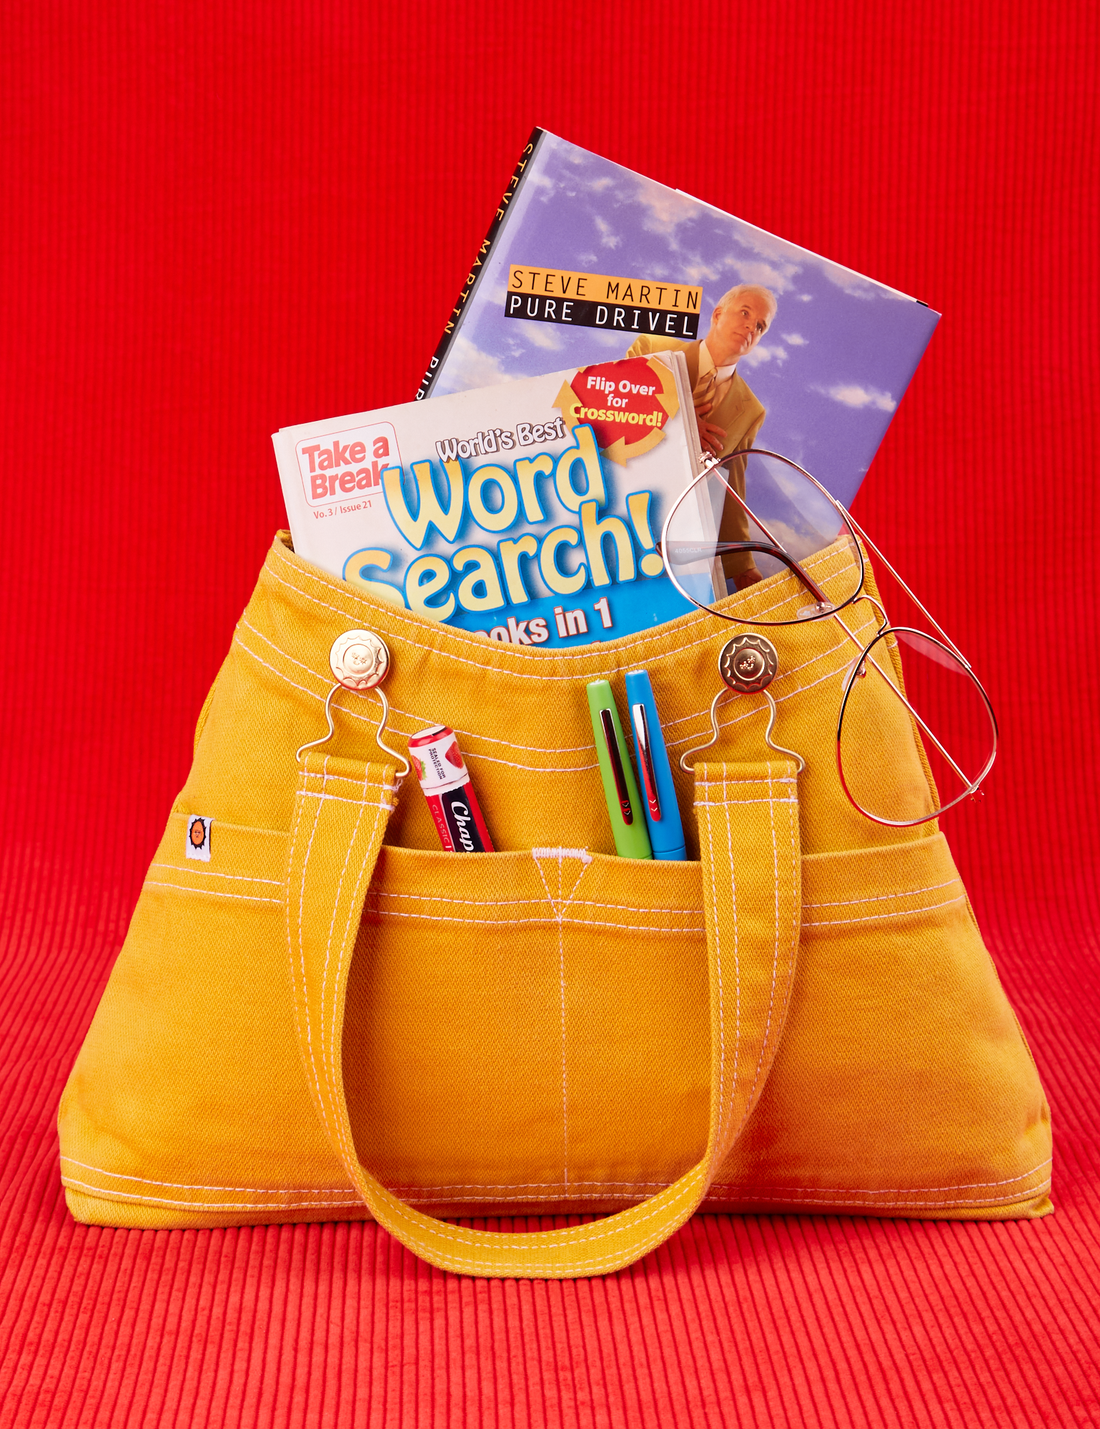 Overall Handbag in Mustard Yellow with two books inside main compartment of bag. Chapstick and two pens are in the outer pockets. Glasses hung along edge of bag.